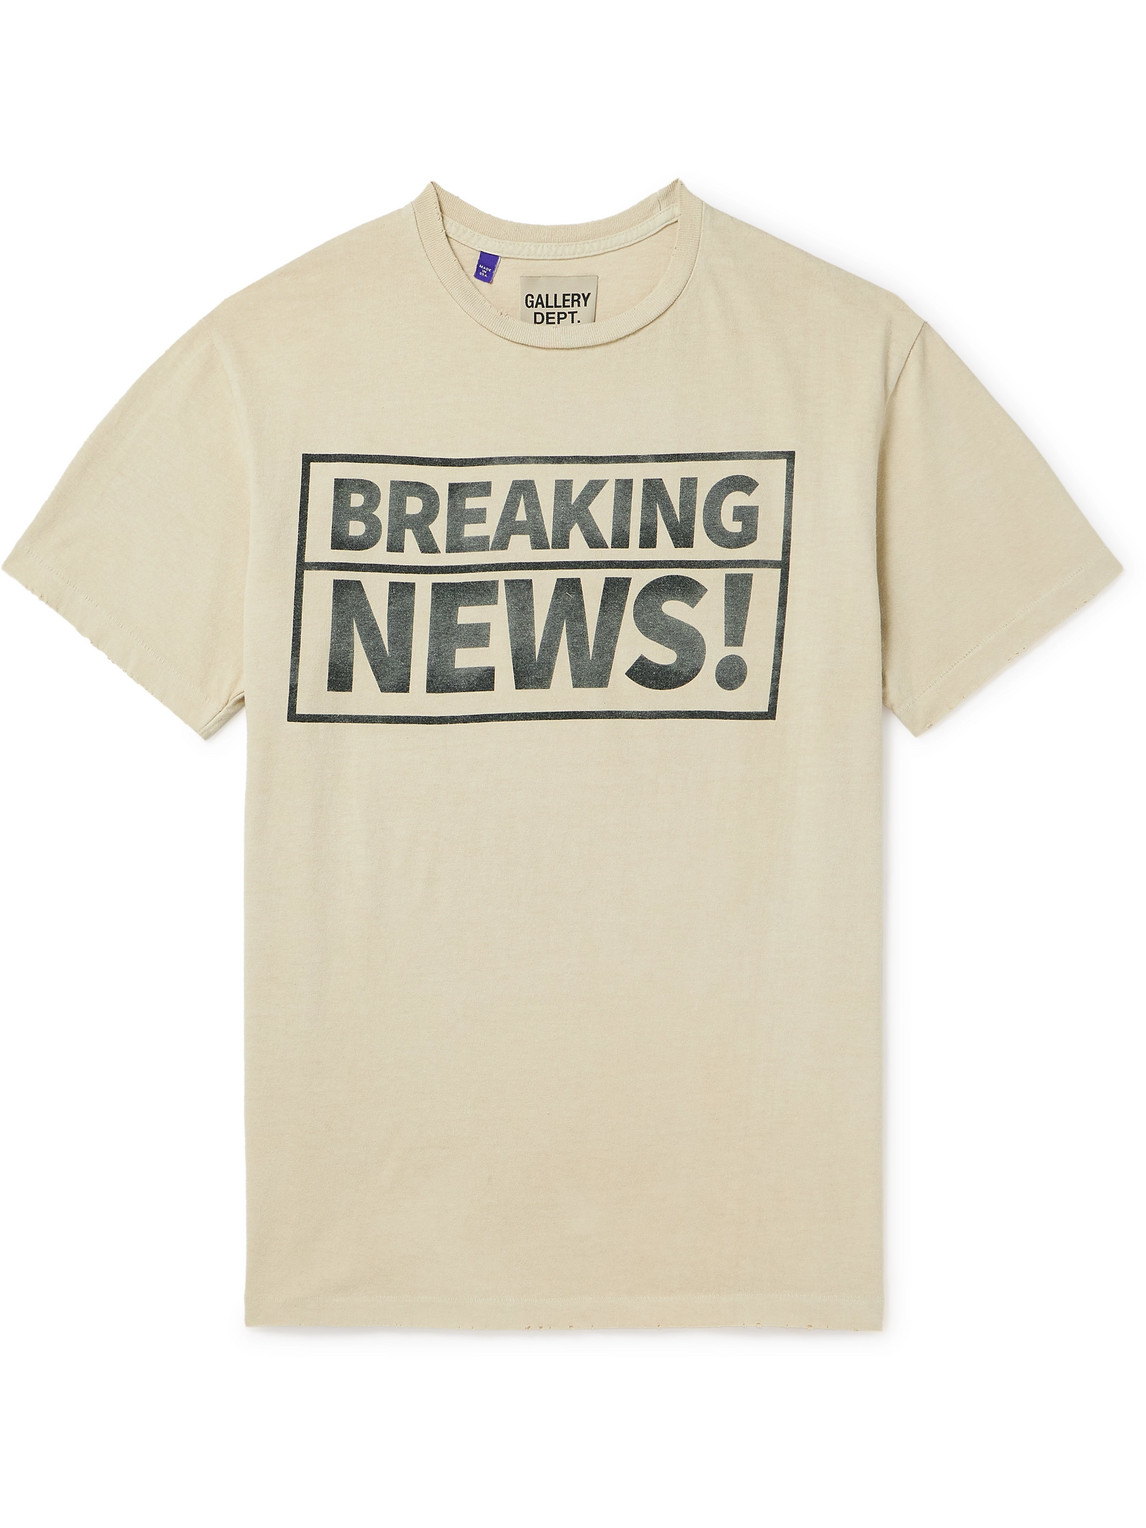 Gallery Dept. Breaking News Distressed Printed Cotton-jersey T-shirt In Neutrals